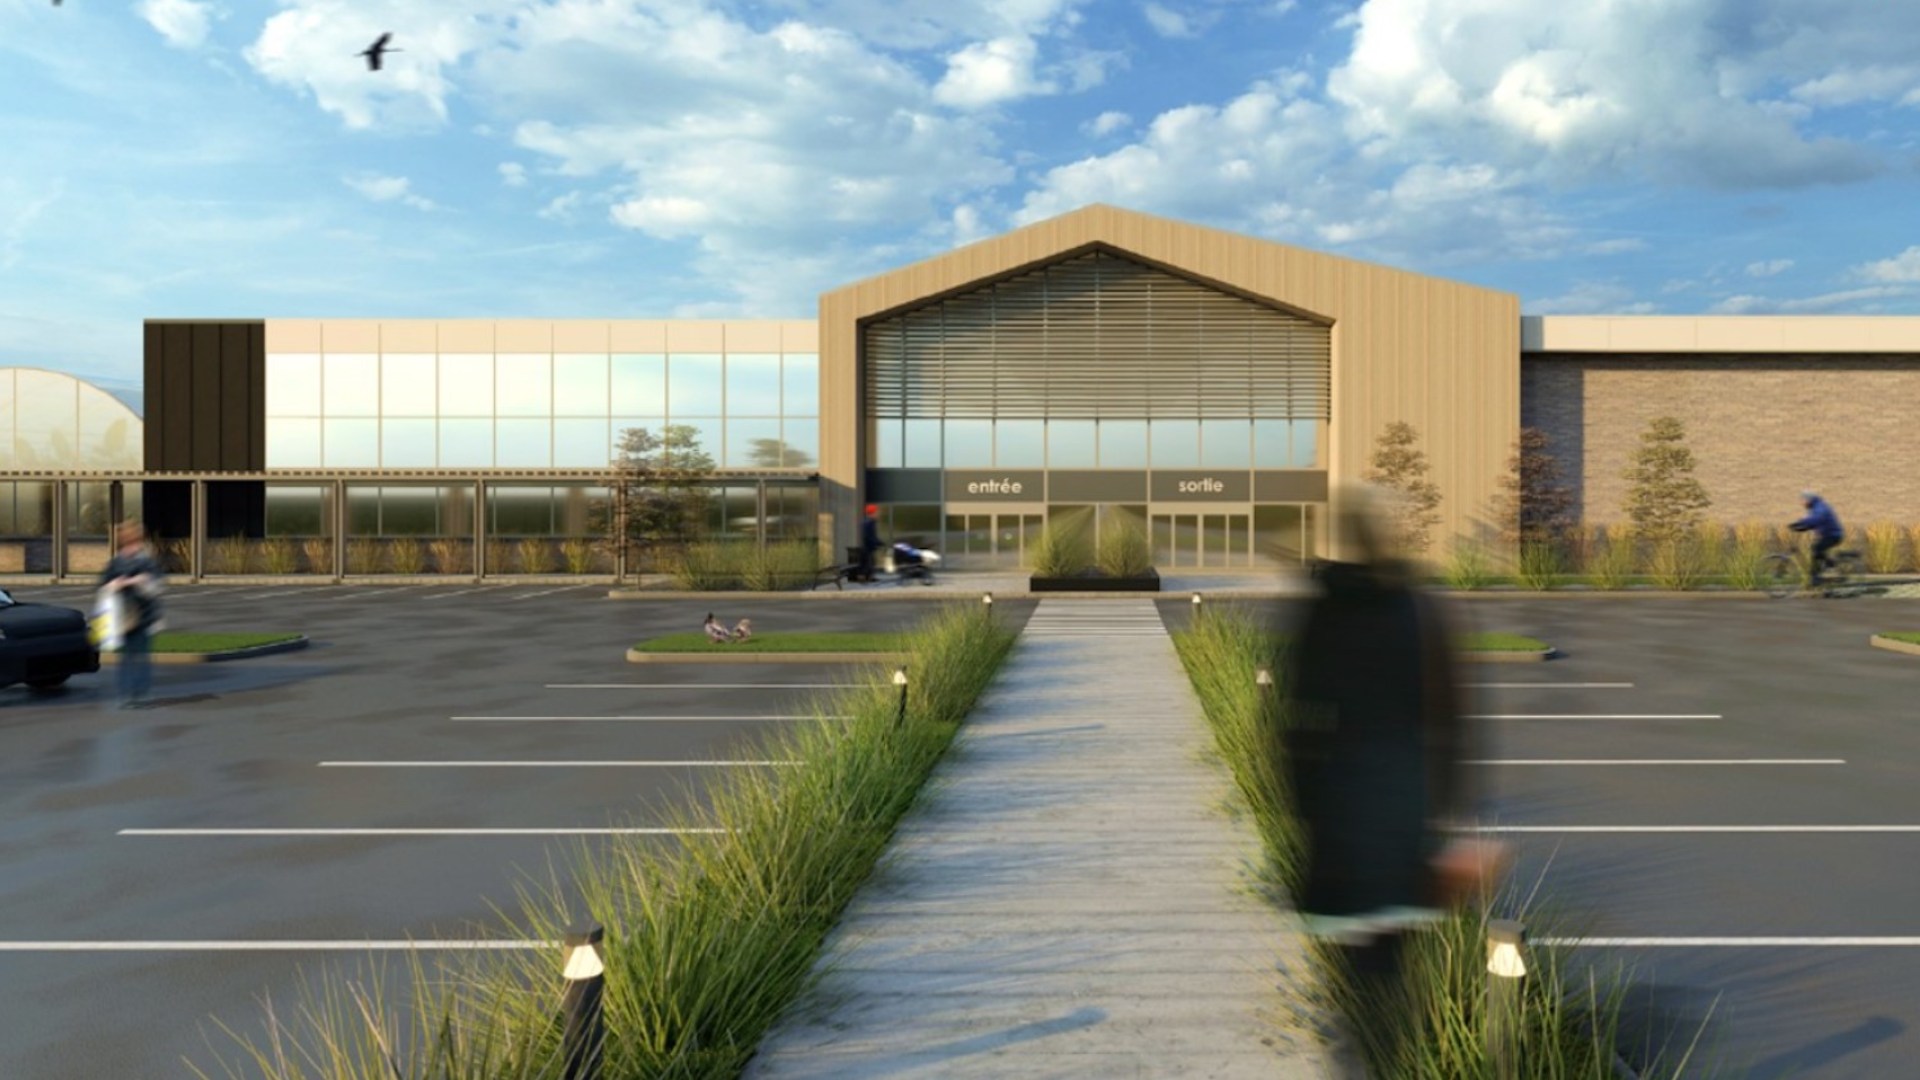 Palmatum has raised capital to build a major commercial facility in Montreal